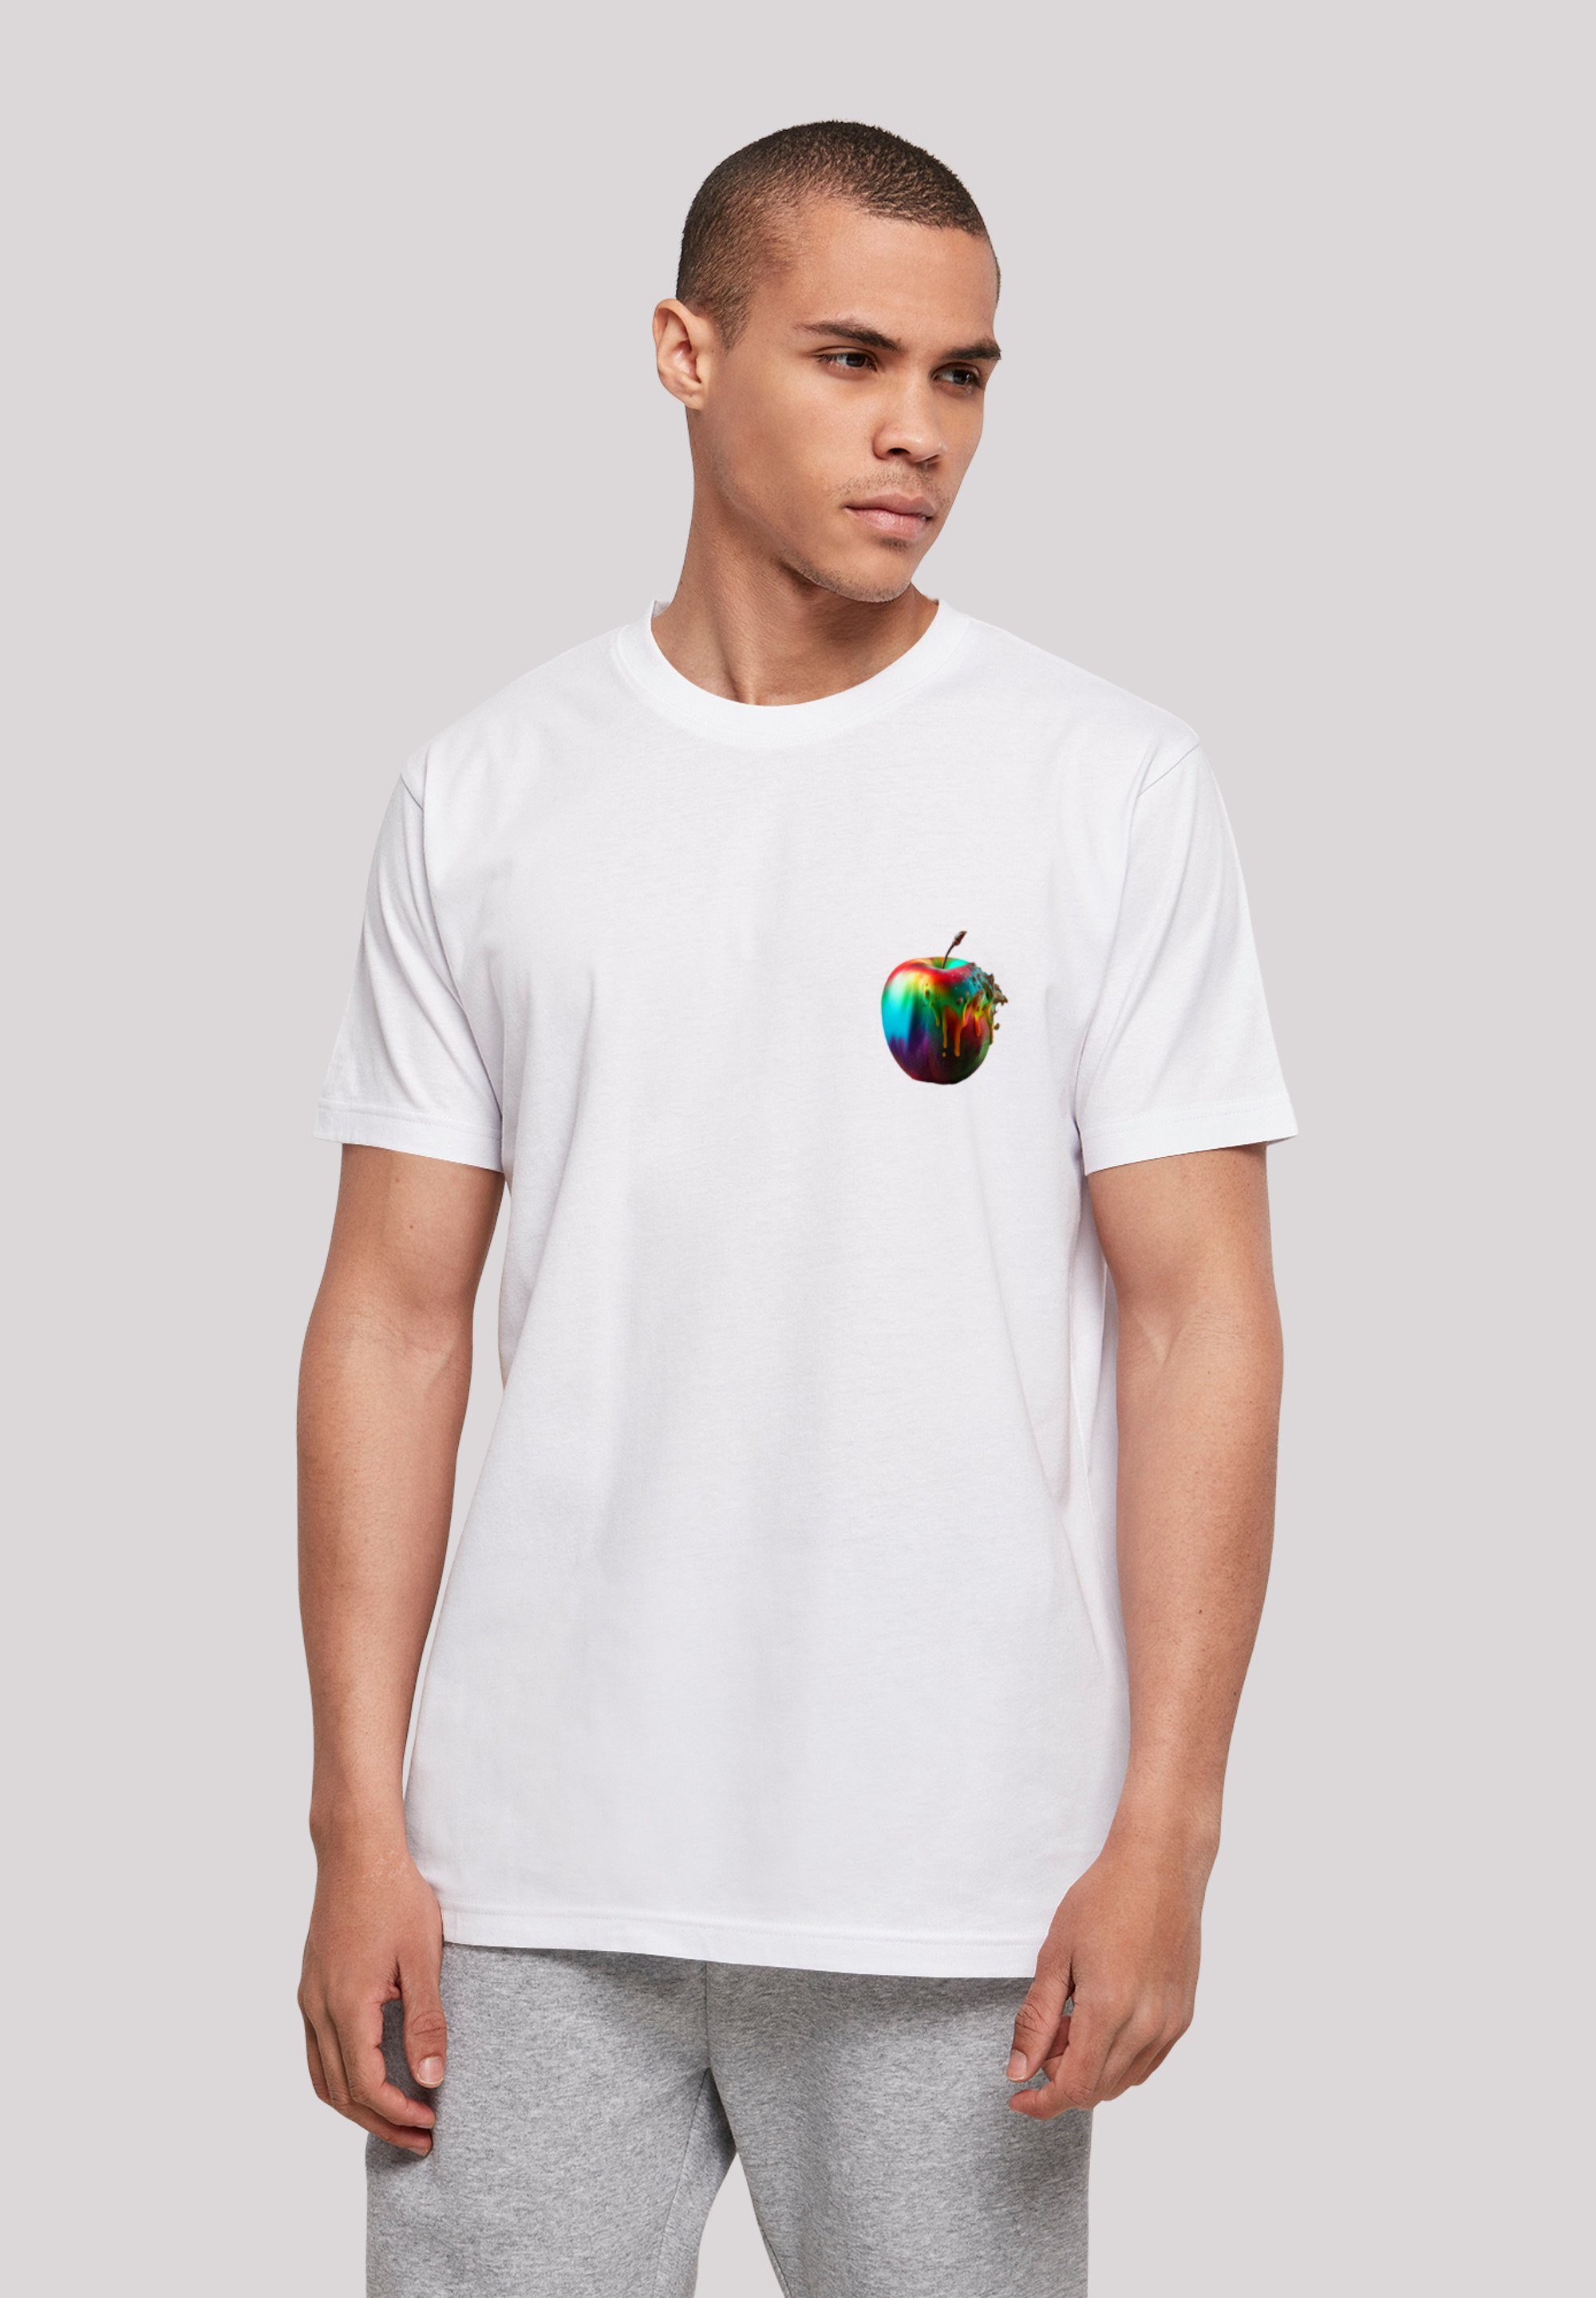 F4NT4STIC T-Shirt Colorfood Apple - Rainbow Print weiß Collection